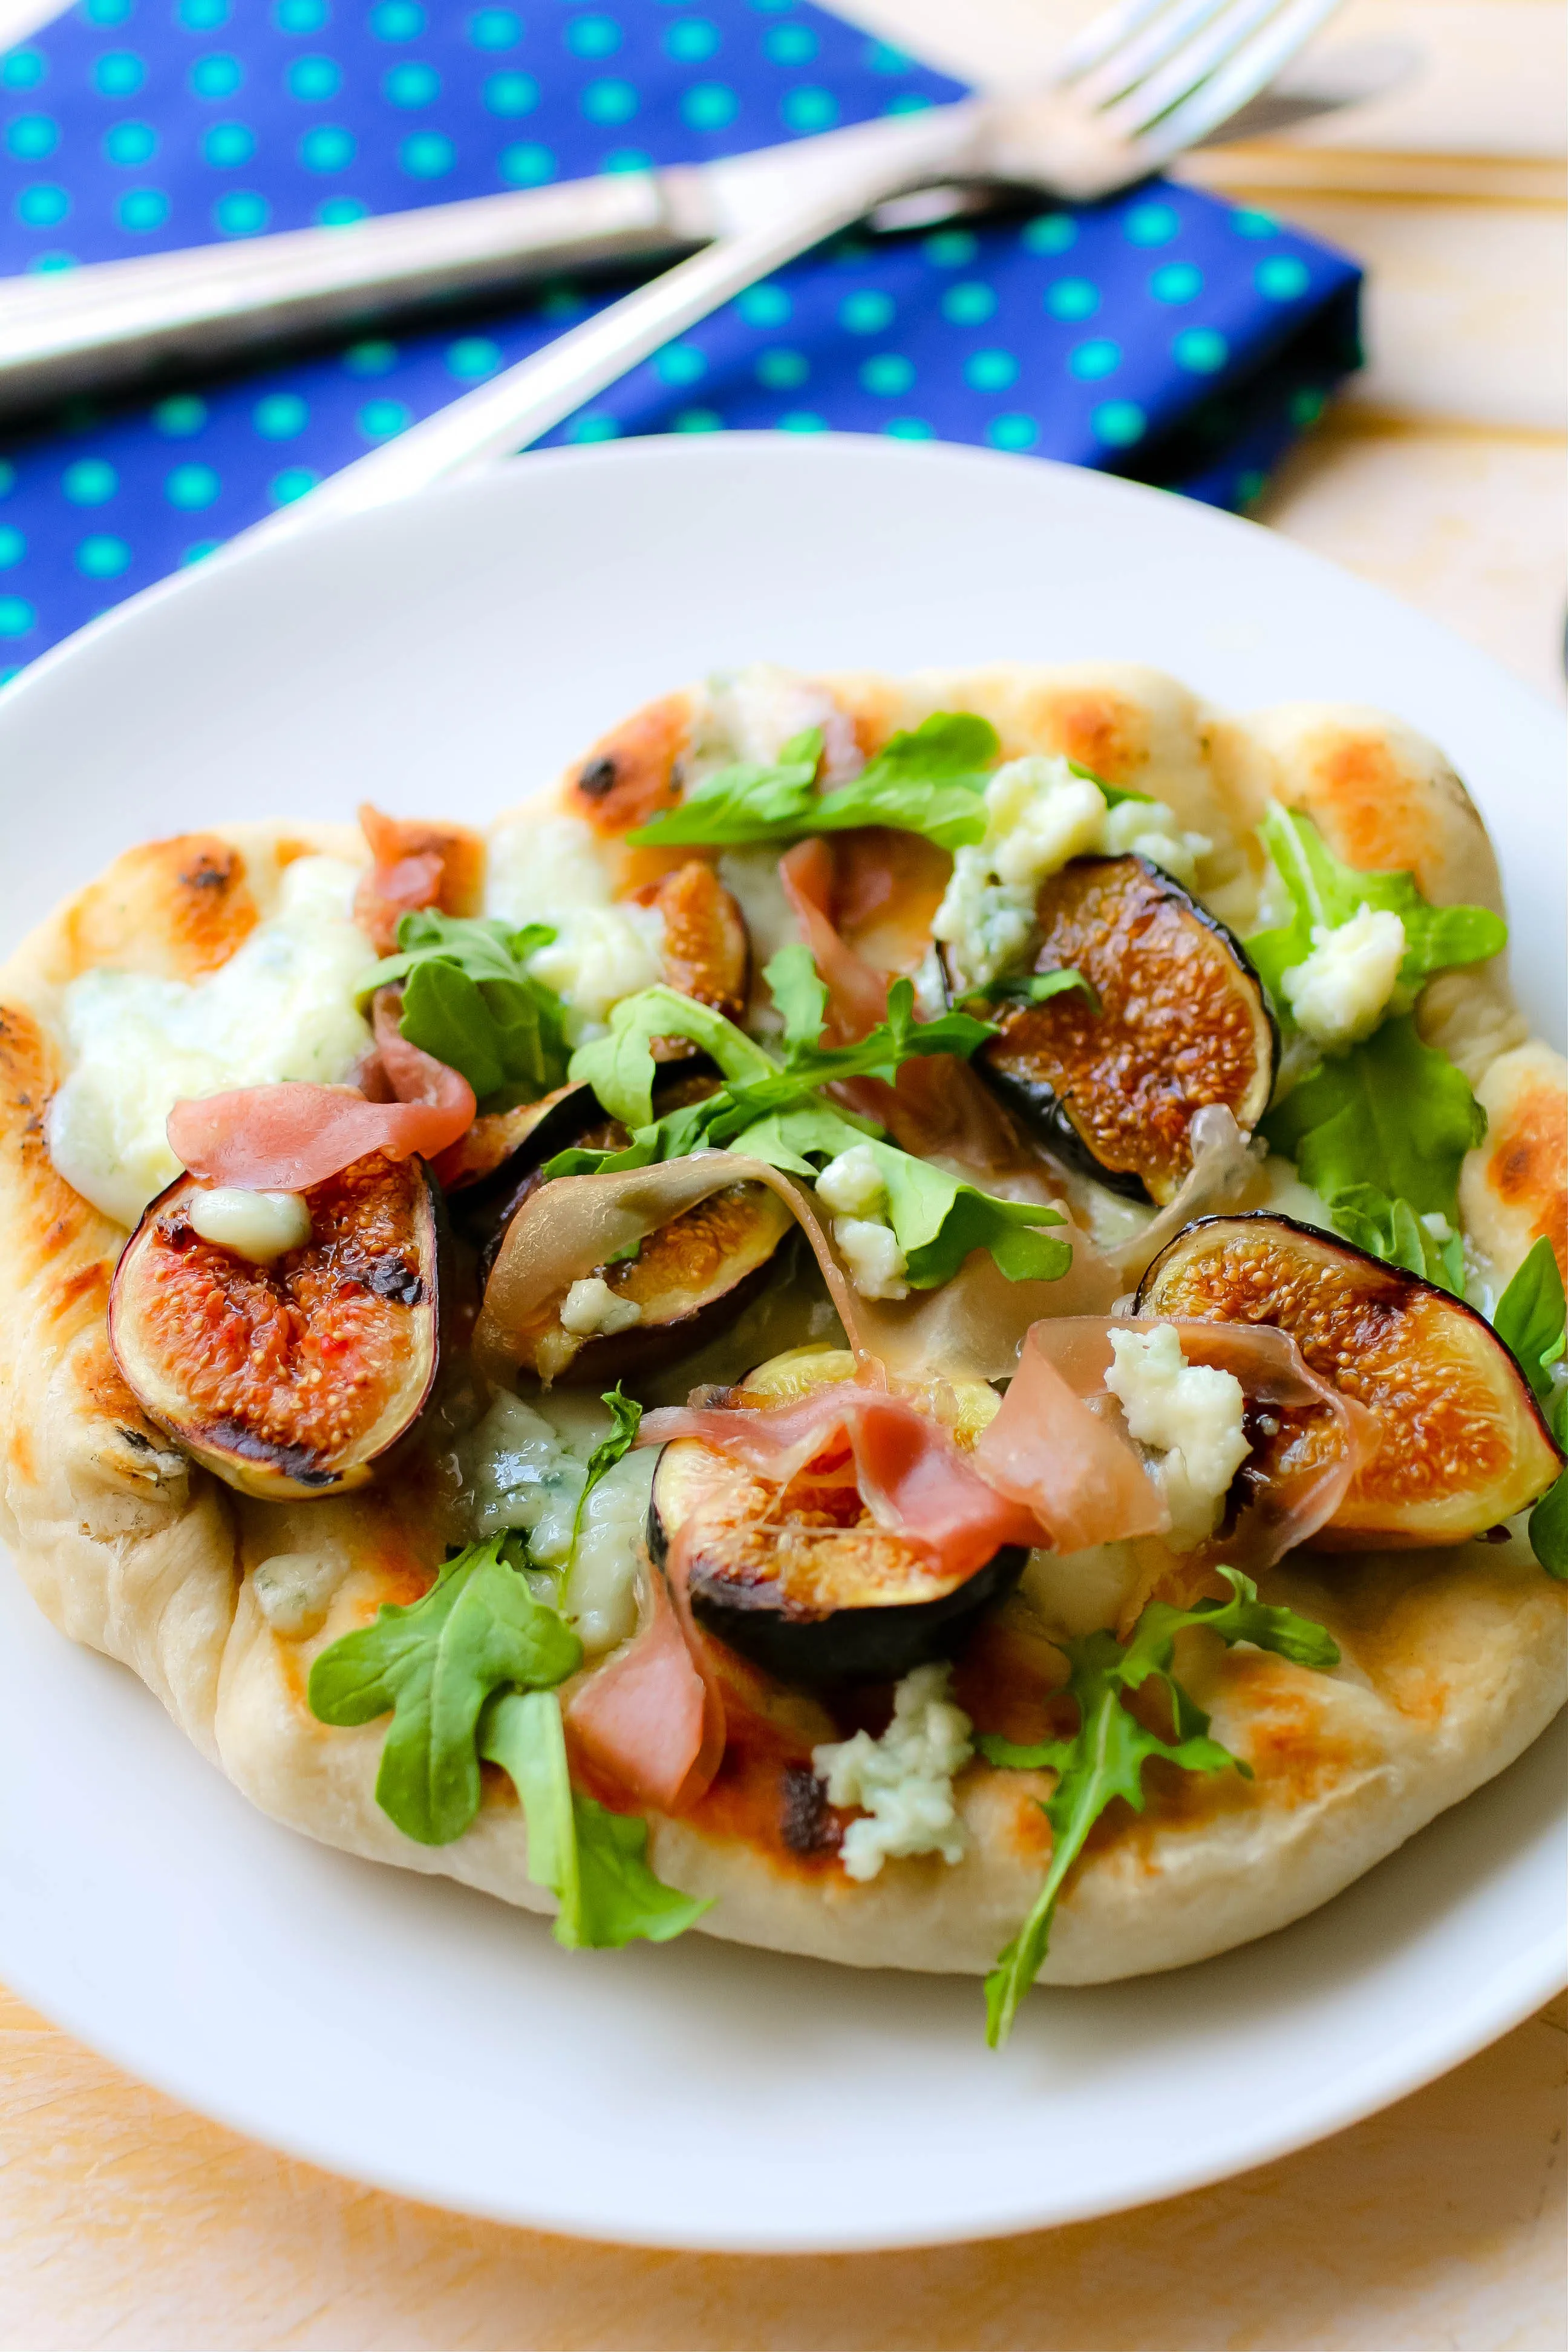 Grilled Pizza with Figs, Prosciutto, and Blue Cheese is a delight for any meal. Make yourself this Grilled Pizza with Figs, Prosciutto, and Blue Cheese -- you'll love it!